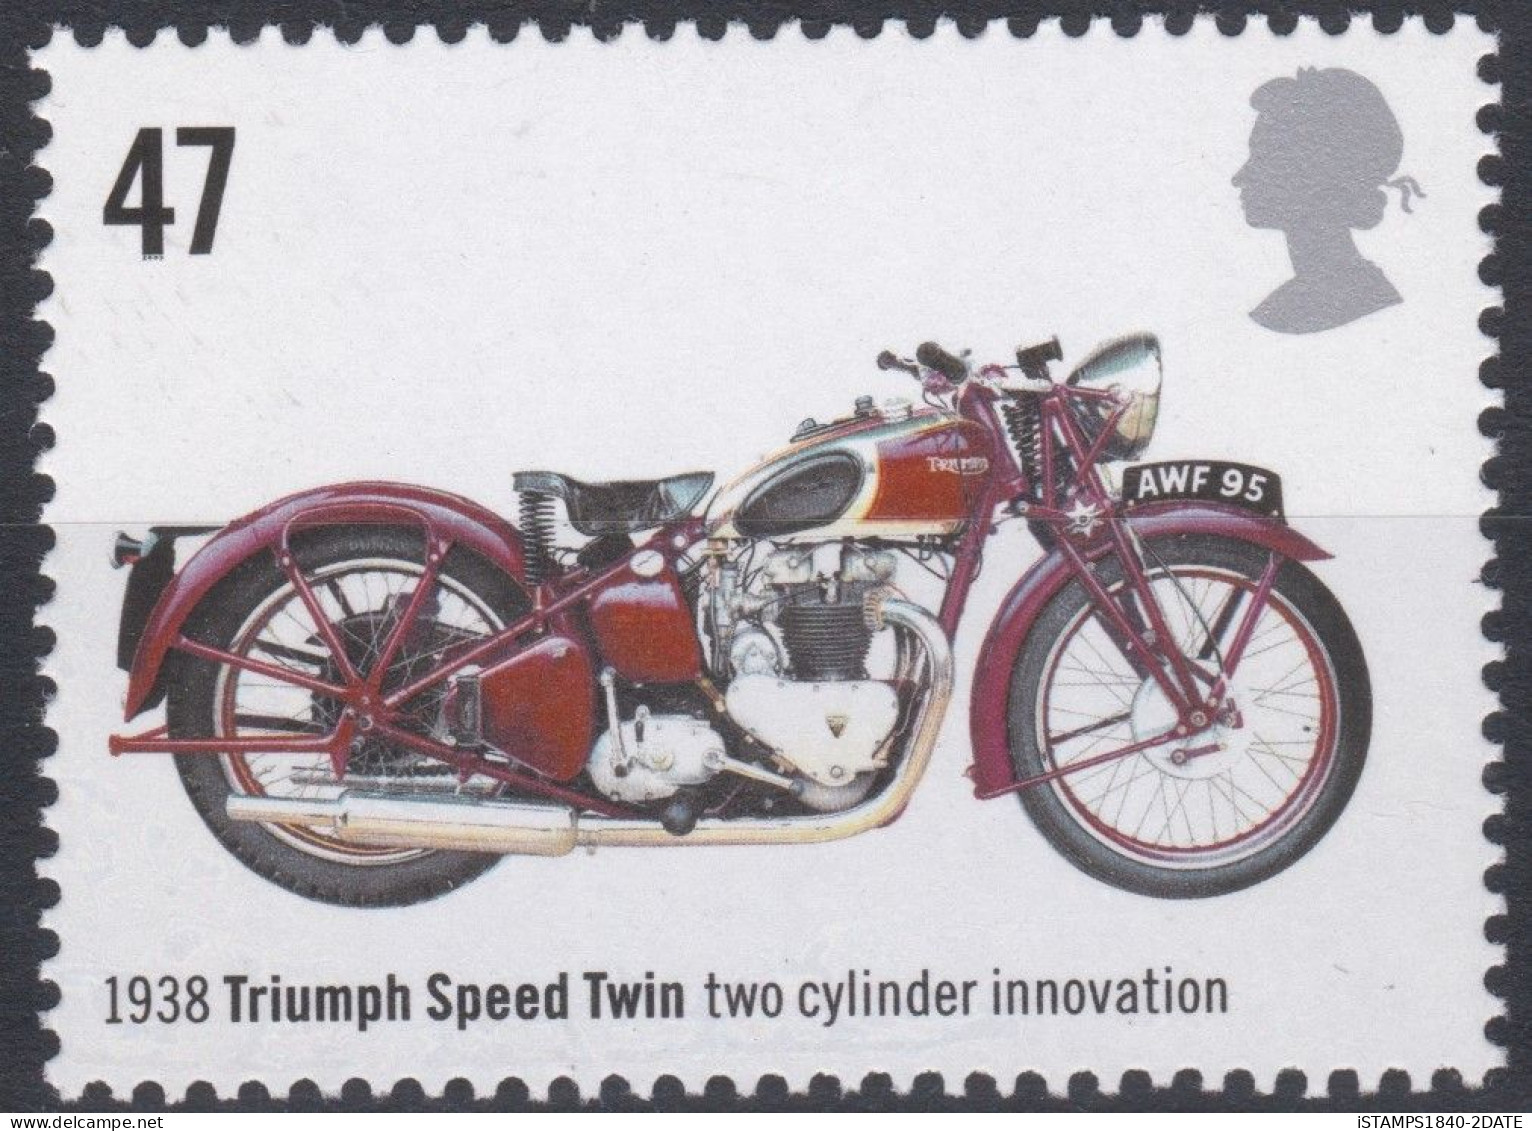 00863/Great Britain 2005 Sg2551 47p Multicoloured MNH Triumph Speed Twin, Two Cylinder Innovation (1938) - Motorräder